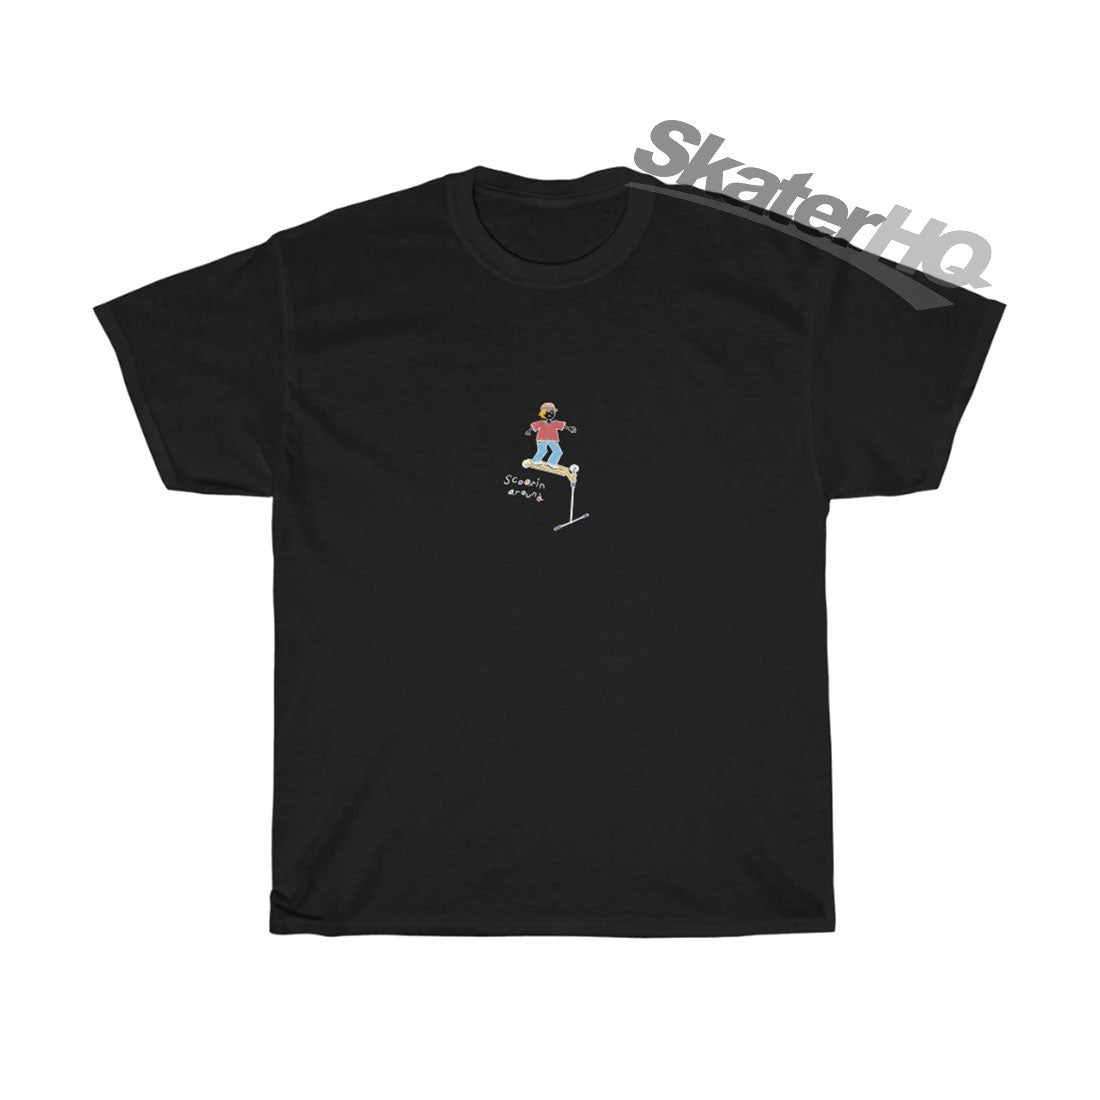 Saundezy Scoofin S/S T-Shirt - Black Apparel Tshirts